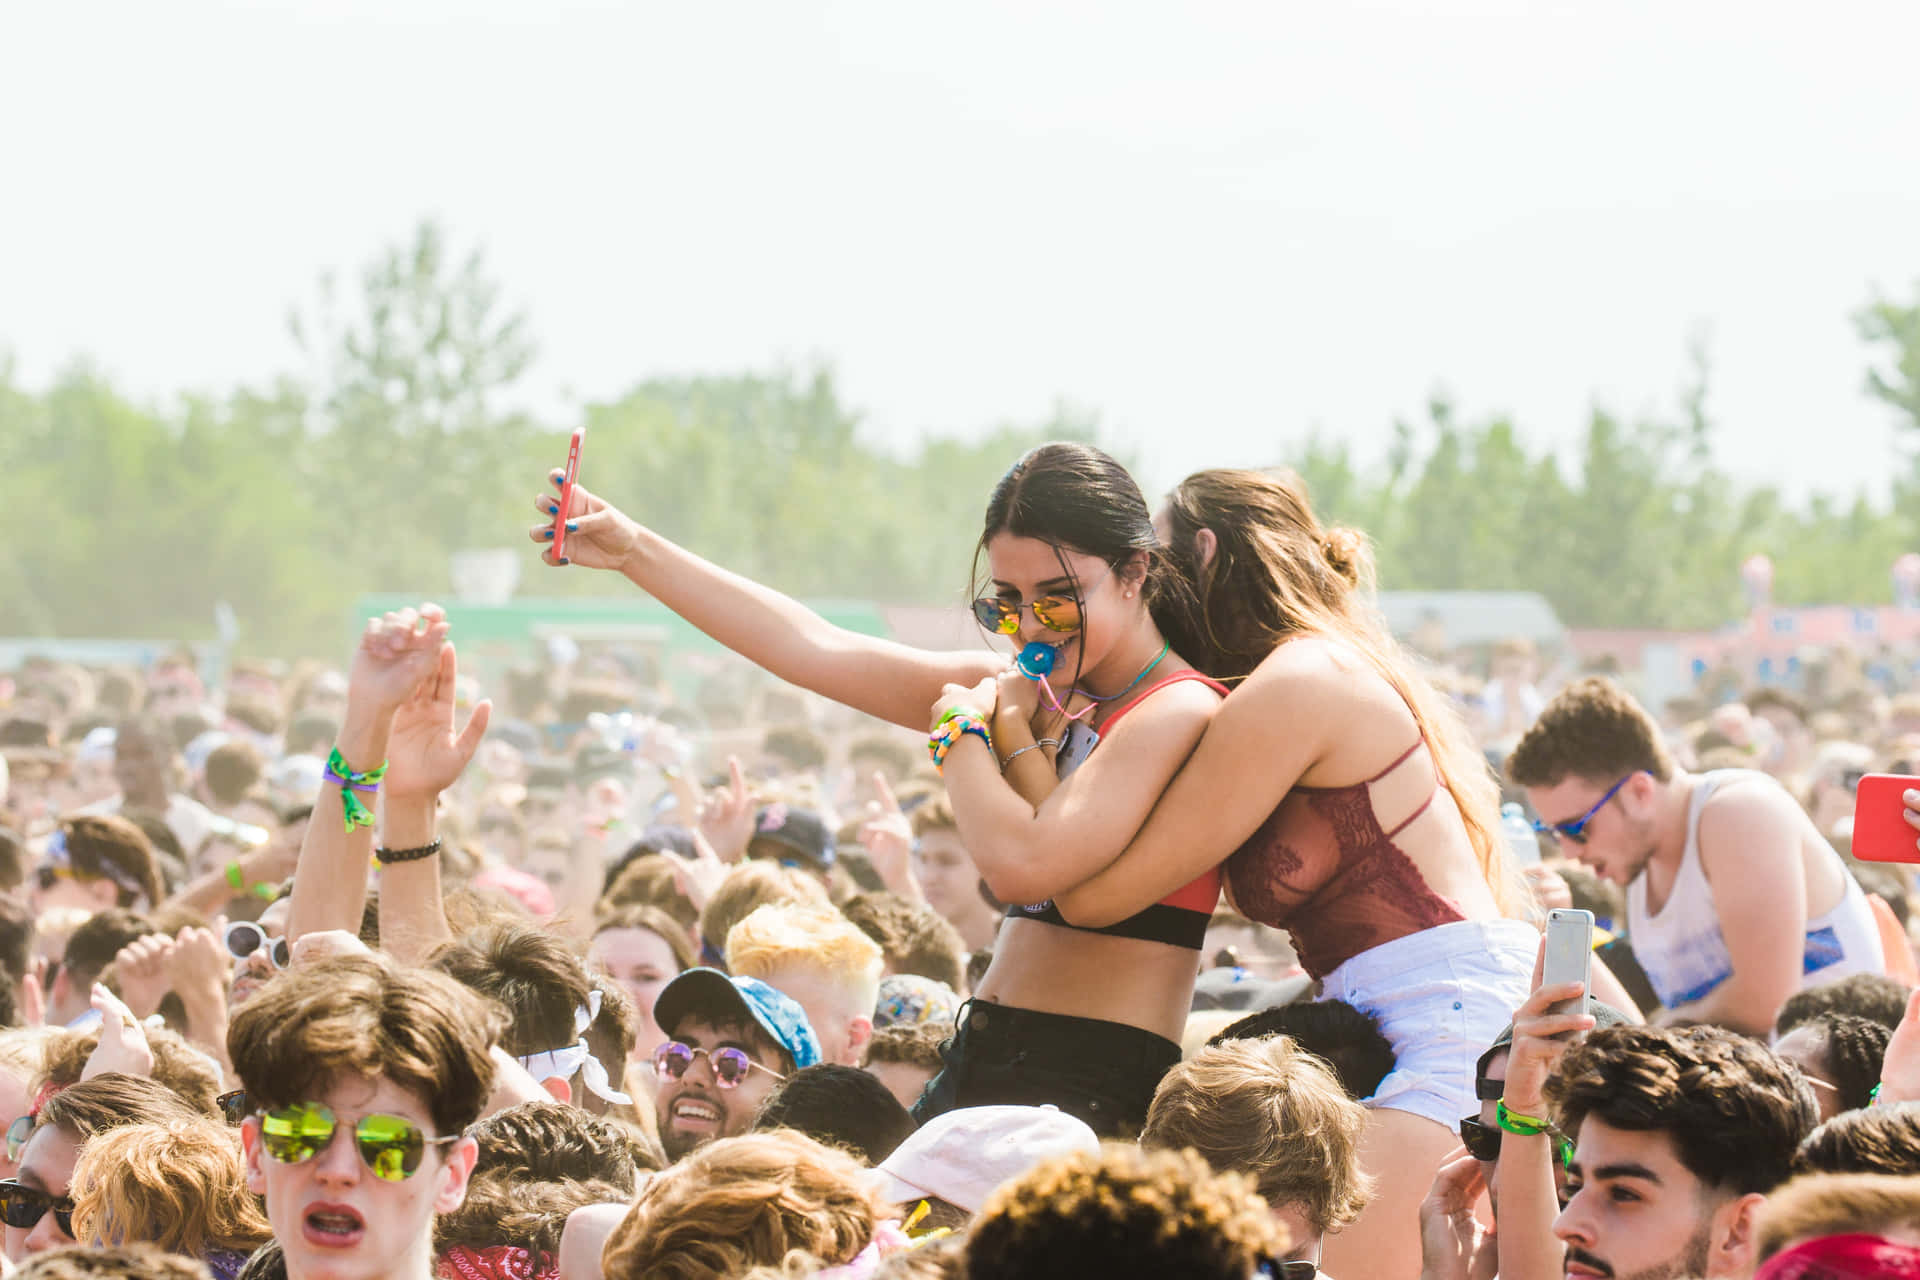 Excited Crowds Enjoying a Vibrant Music Festival Wallpaper